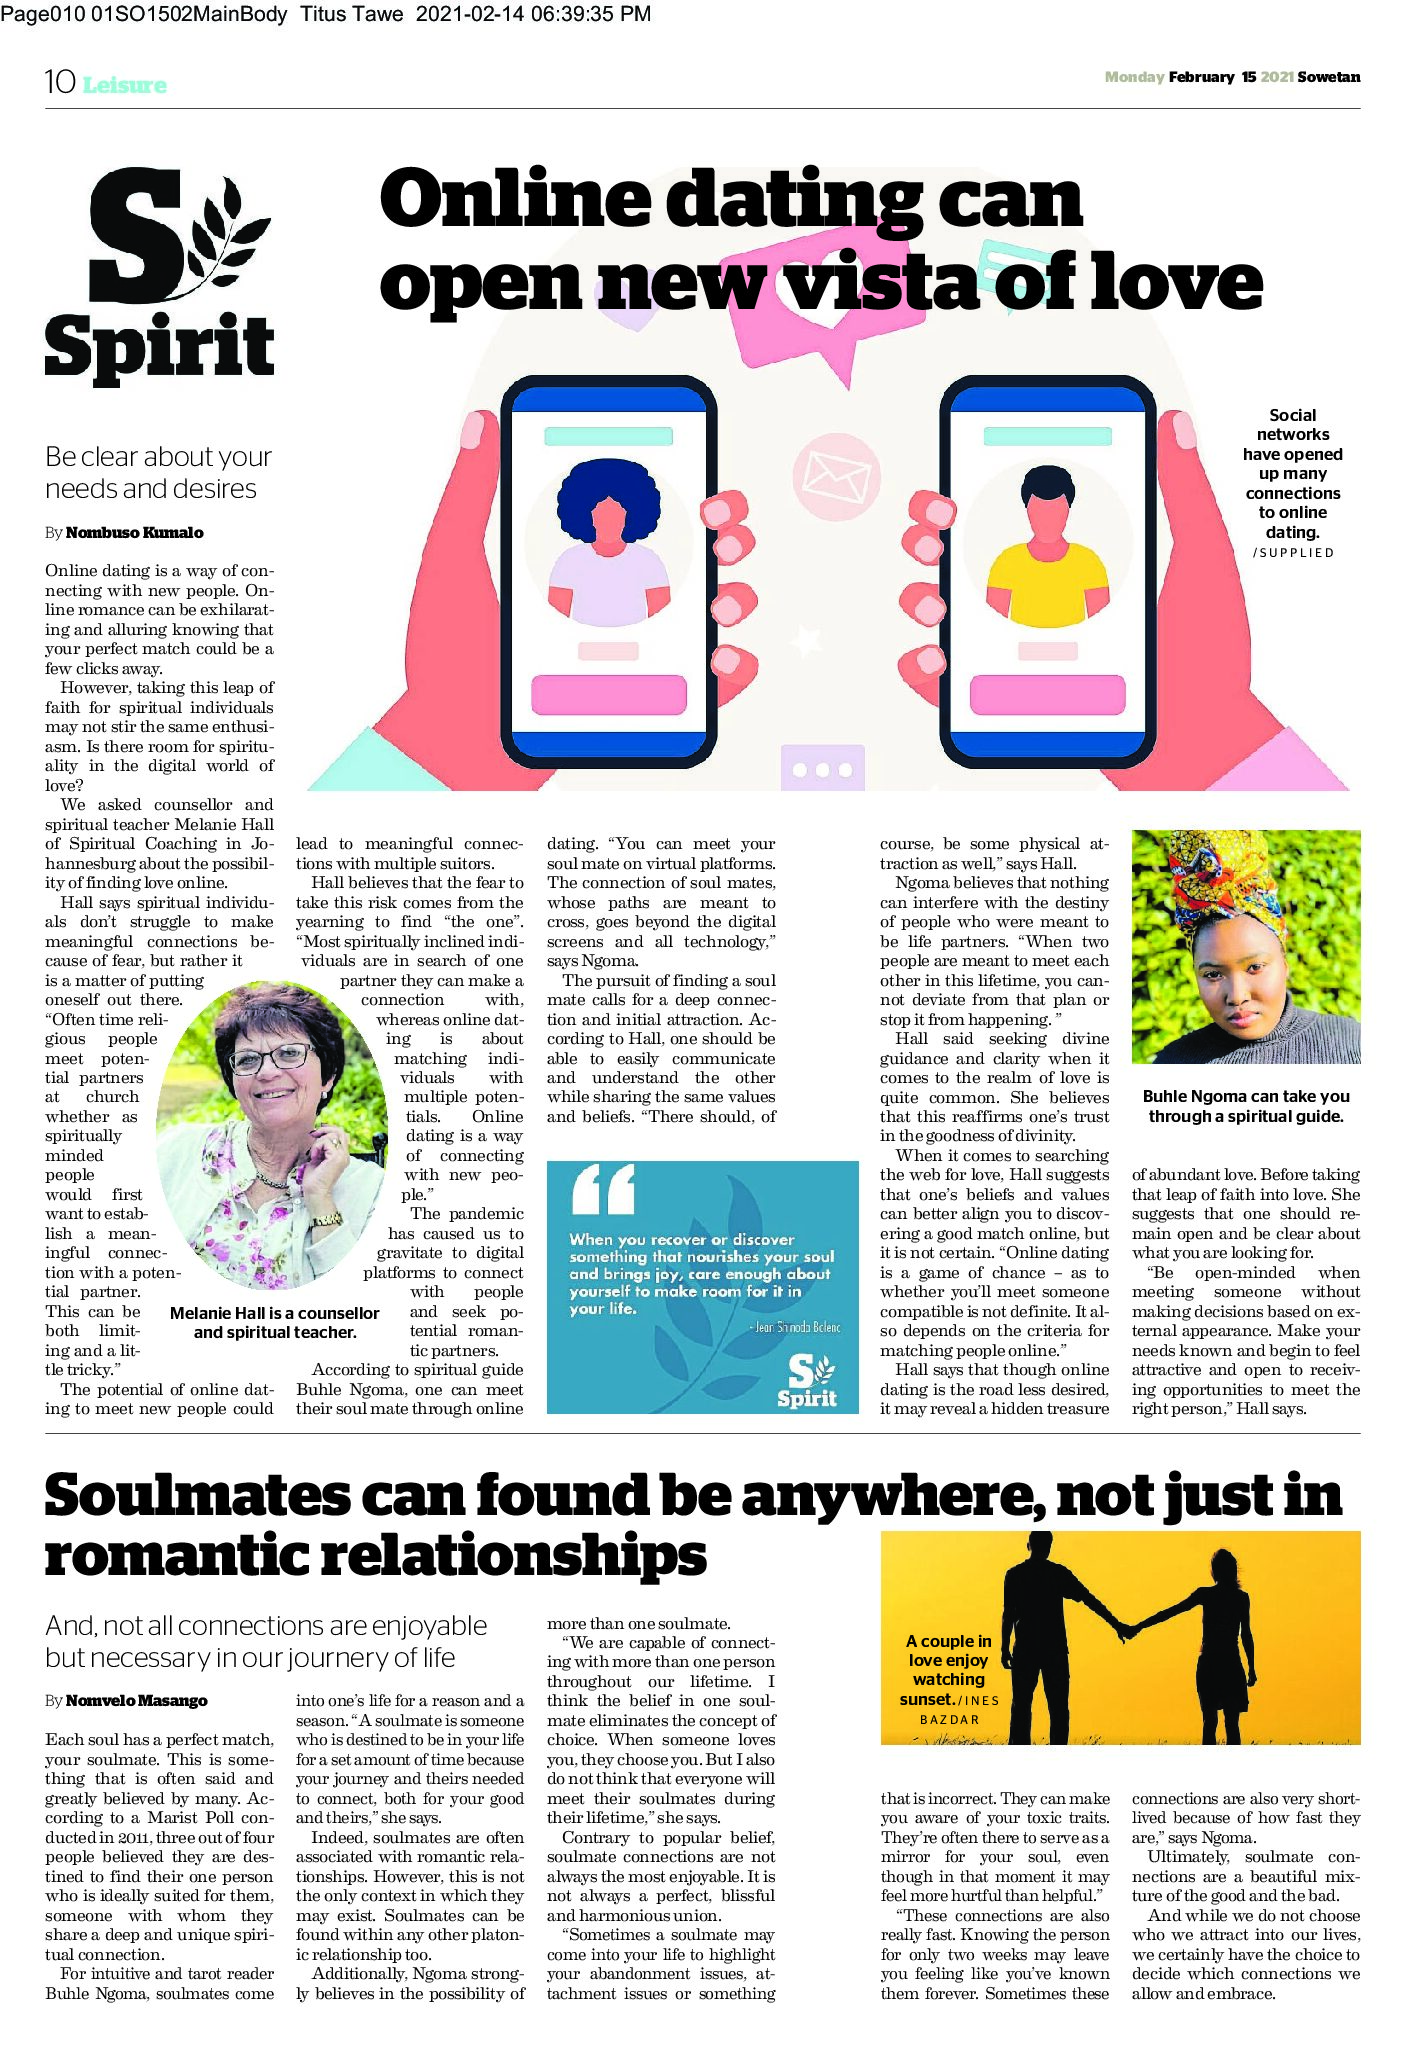 Online dating can open new vista of love